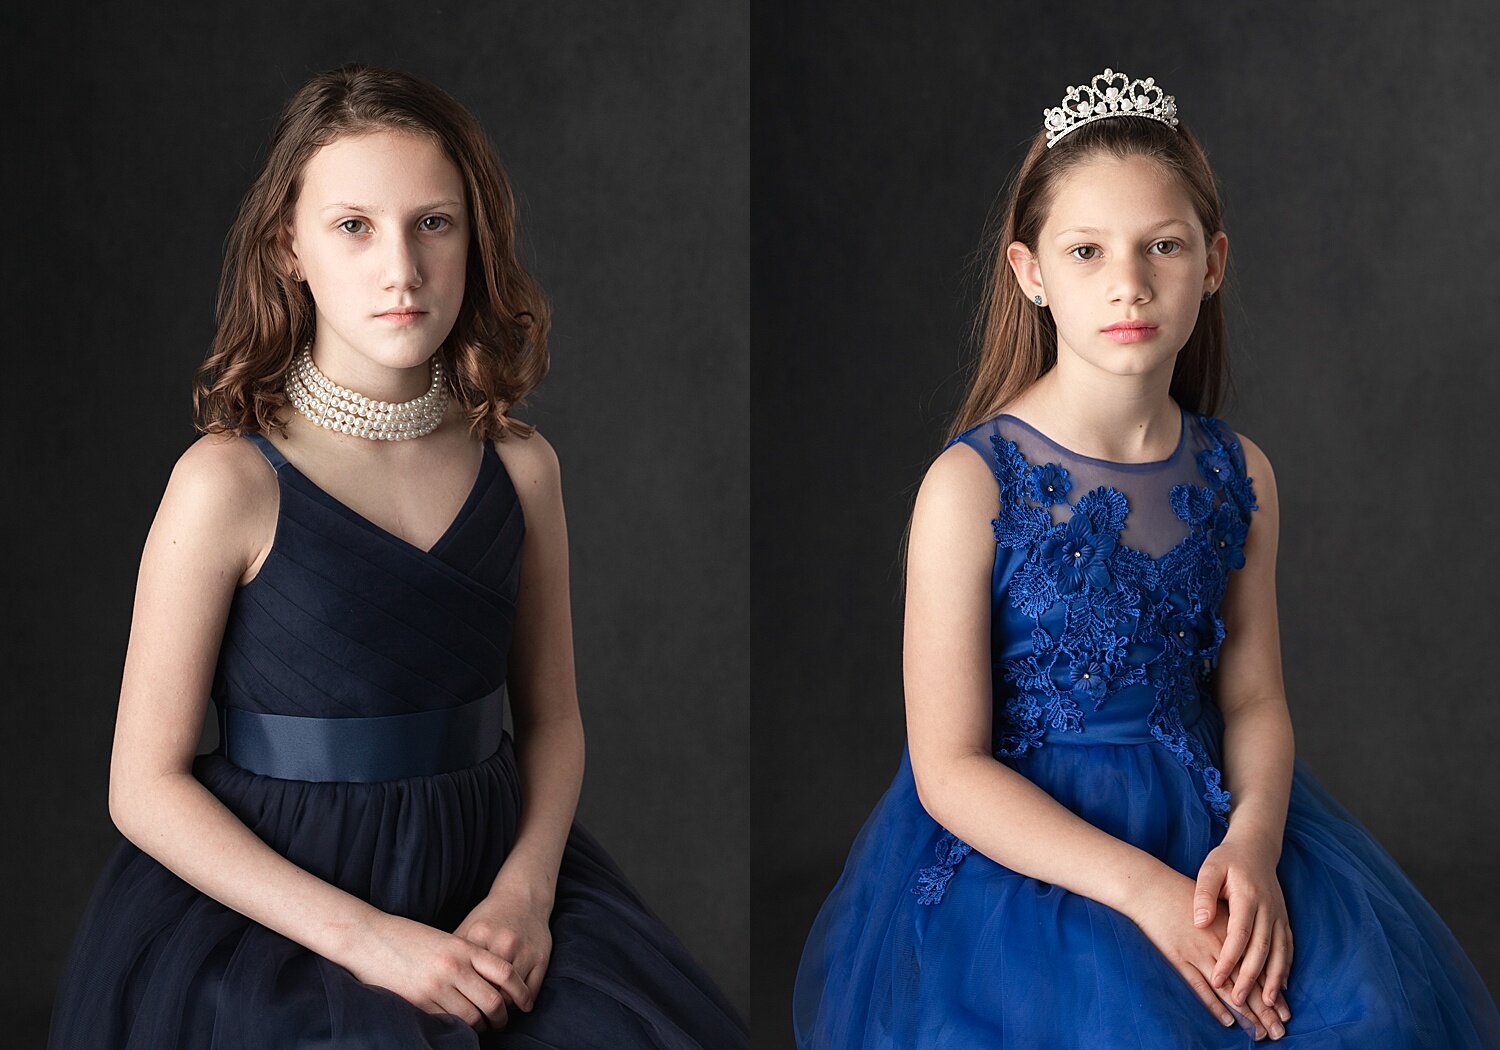 portrait photography, girls in formal dresses with tiara